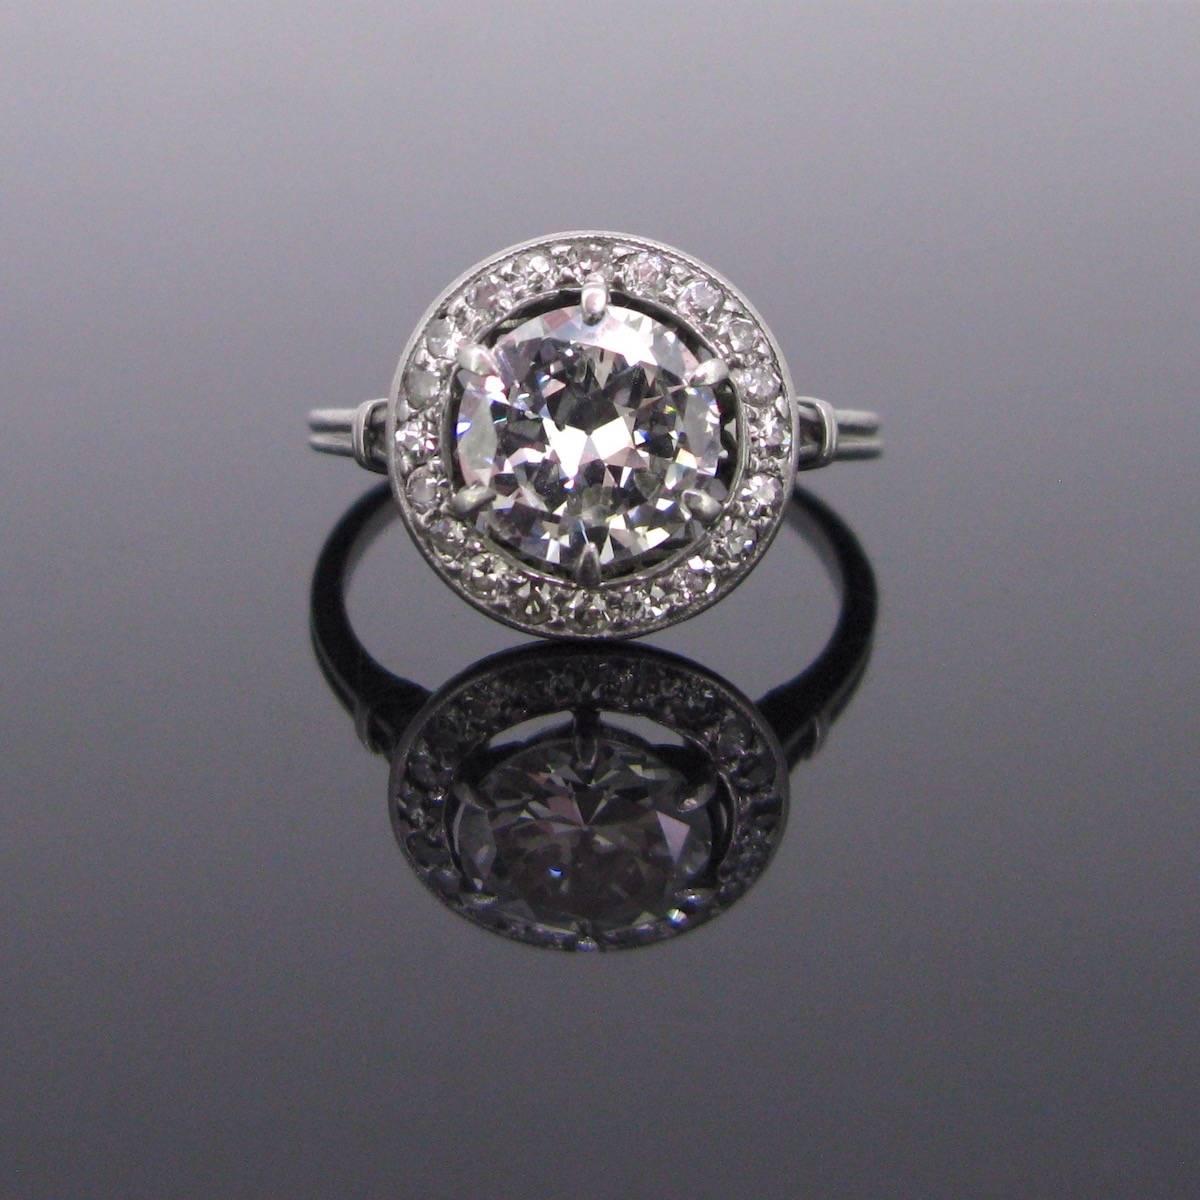 This beautiful Art Deco ring is made in platinum. It is set with a vibrant 1.80ct app diamond, graded H/I for the colour and SI2 for the clarity. It is surrounded with diamonds. The mount is airy and the corpse of the ring is very refined. It is